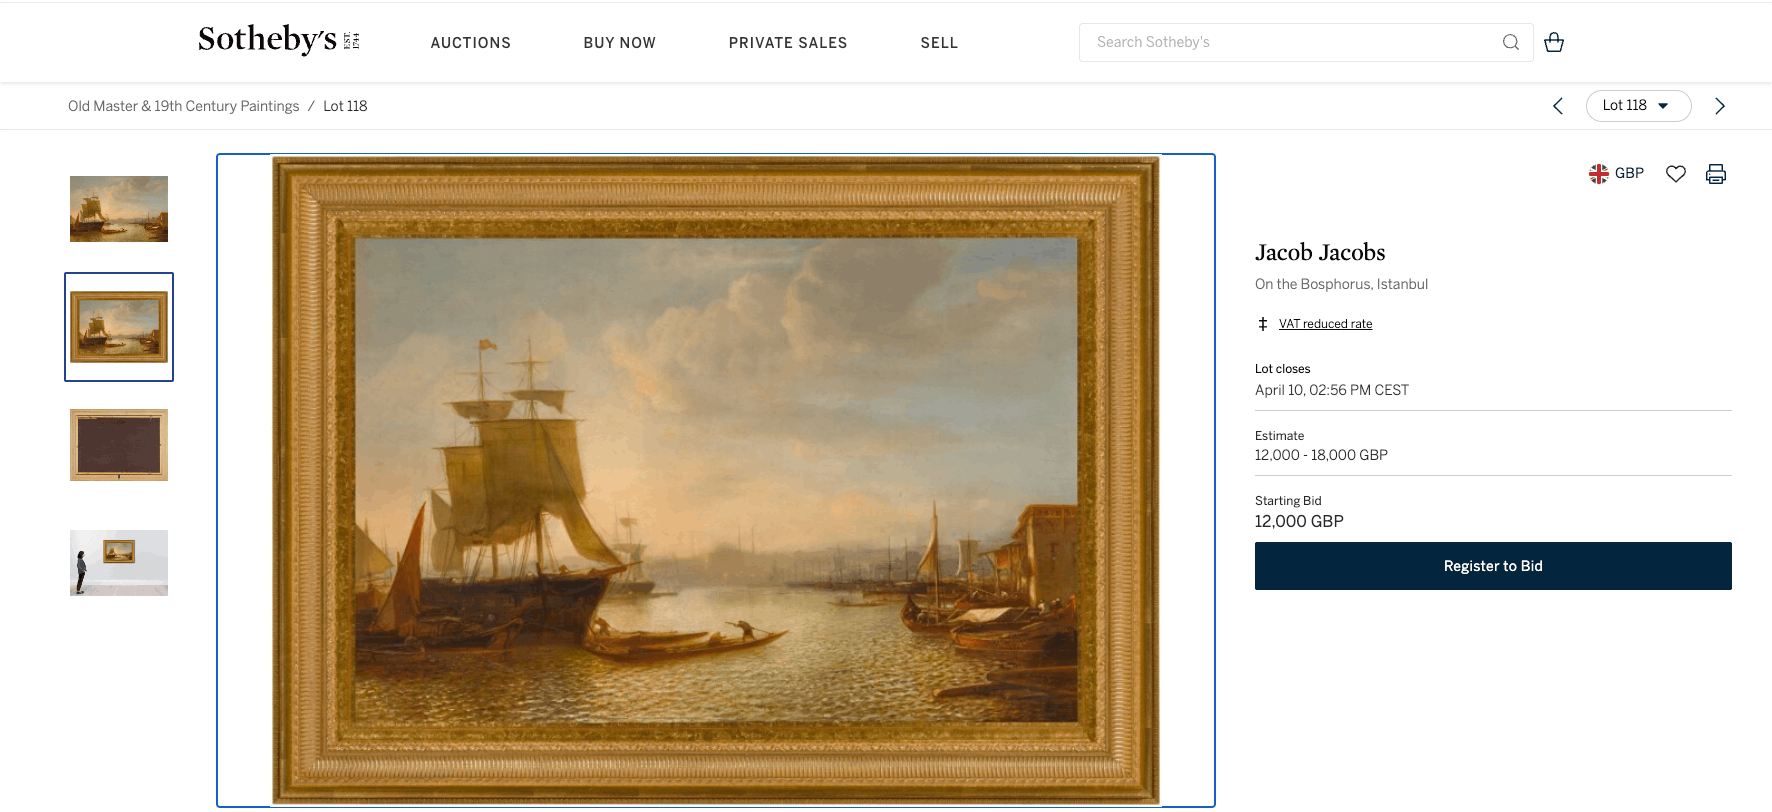 Until 10 April, Sotheby's is selling another of Jacob Jacobs’ paintings, “On the Bosphorus,” dated 1878. Screenshot: Sothebys.com